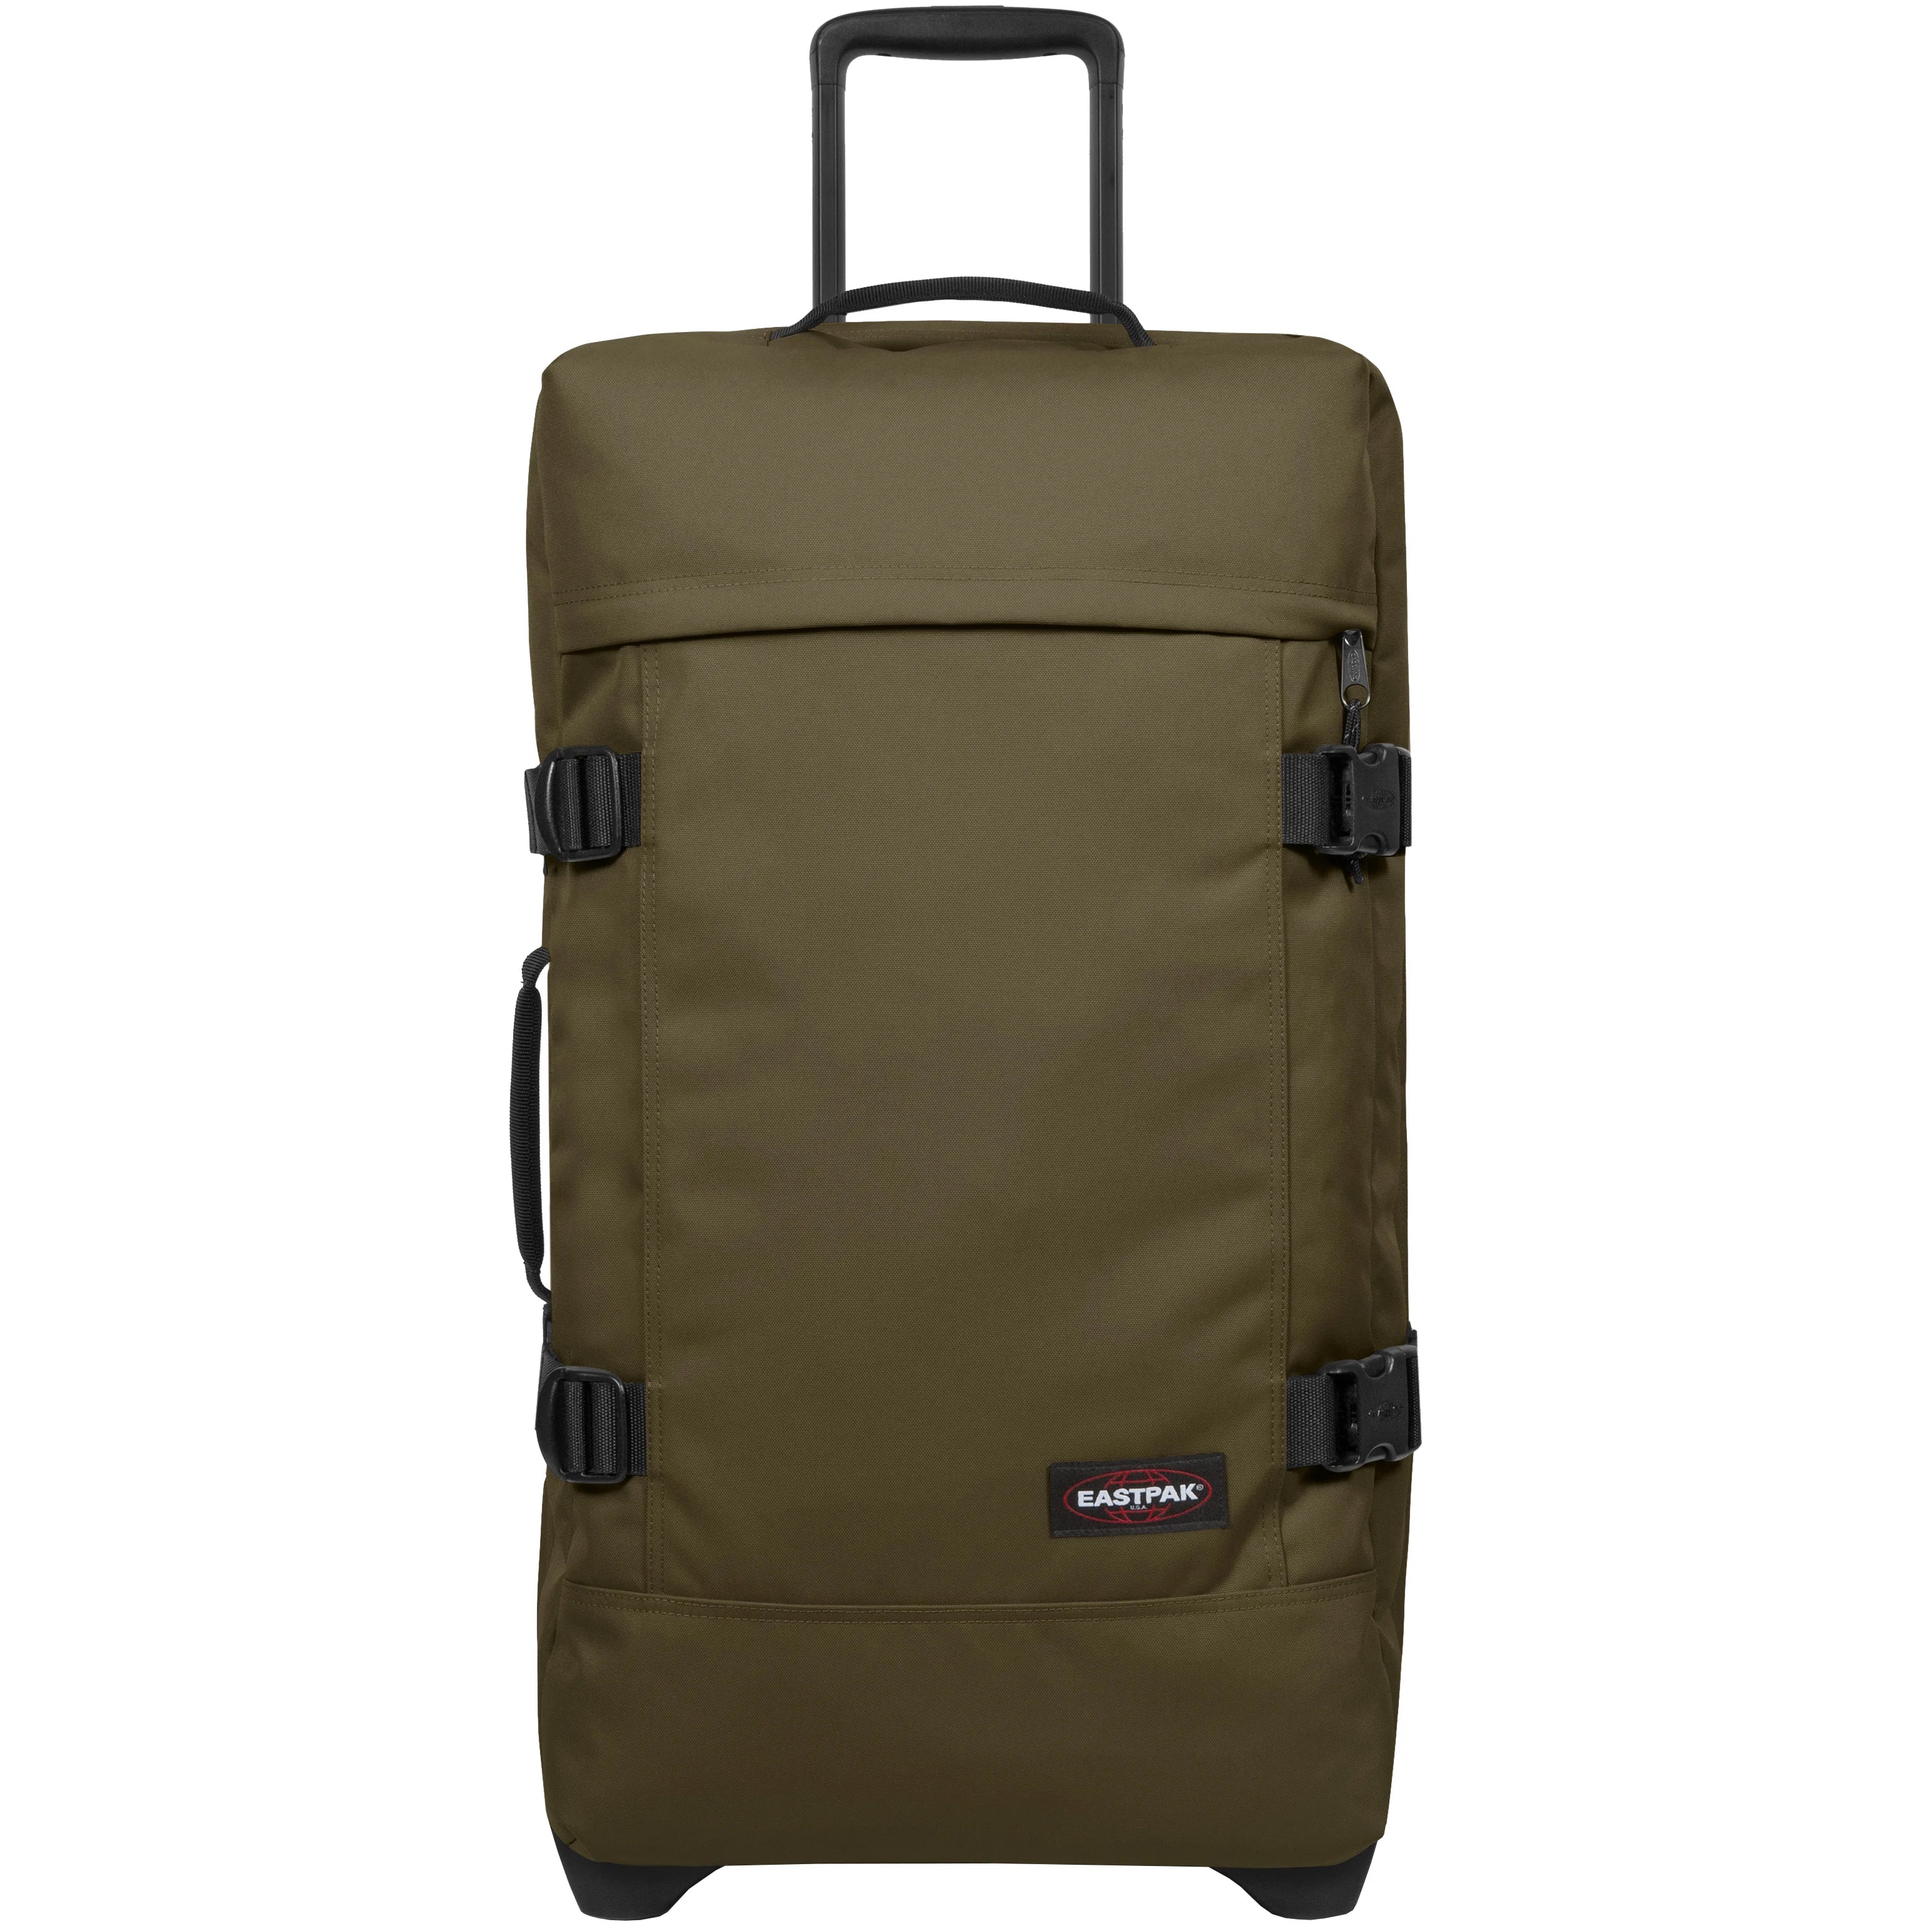 Eastpak Authentic Travel Tranverz trolley 2 roues 67 cm - Army Olive